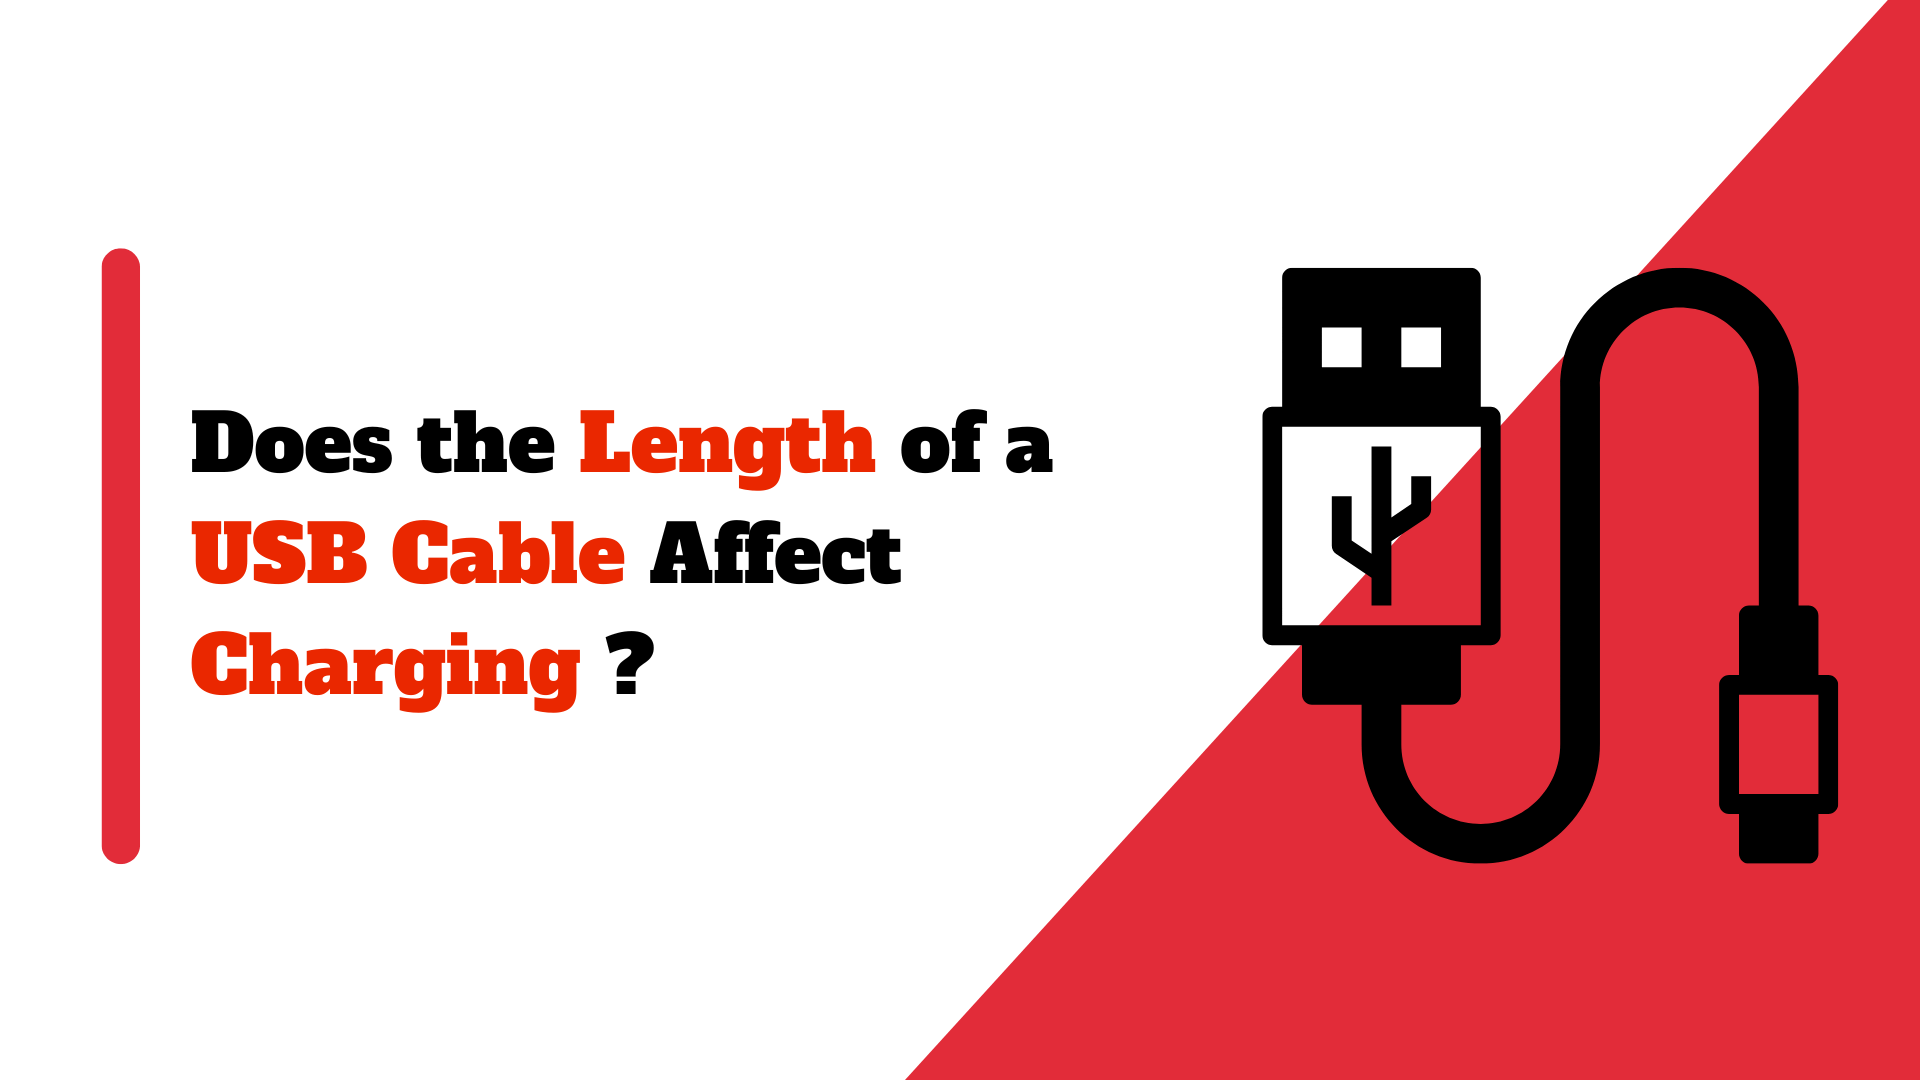 Does the Length of a USB Cable Affect Charging